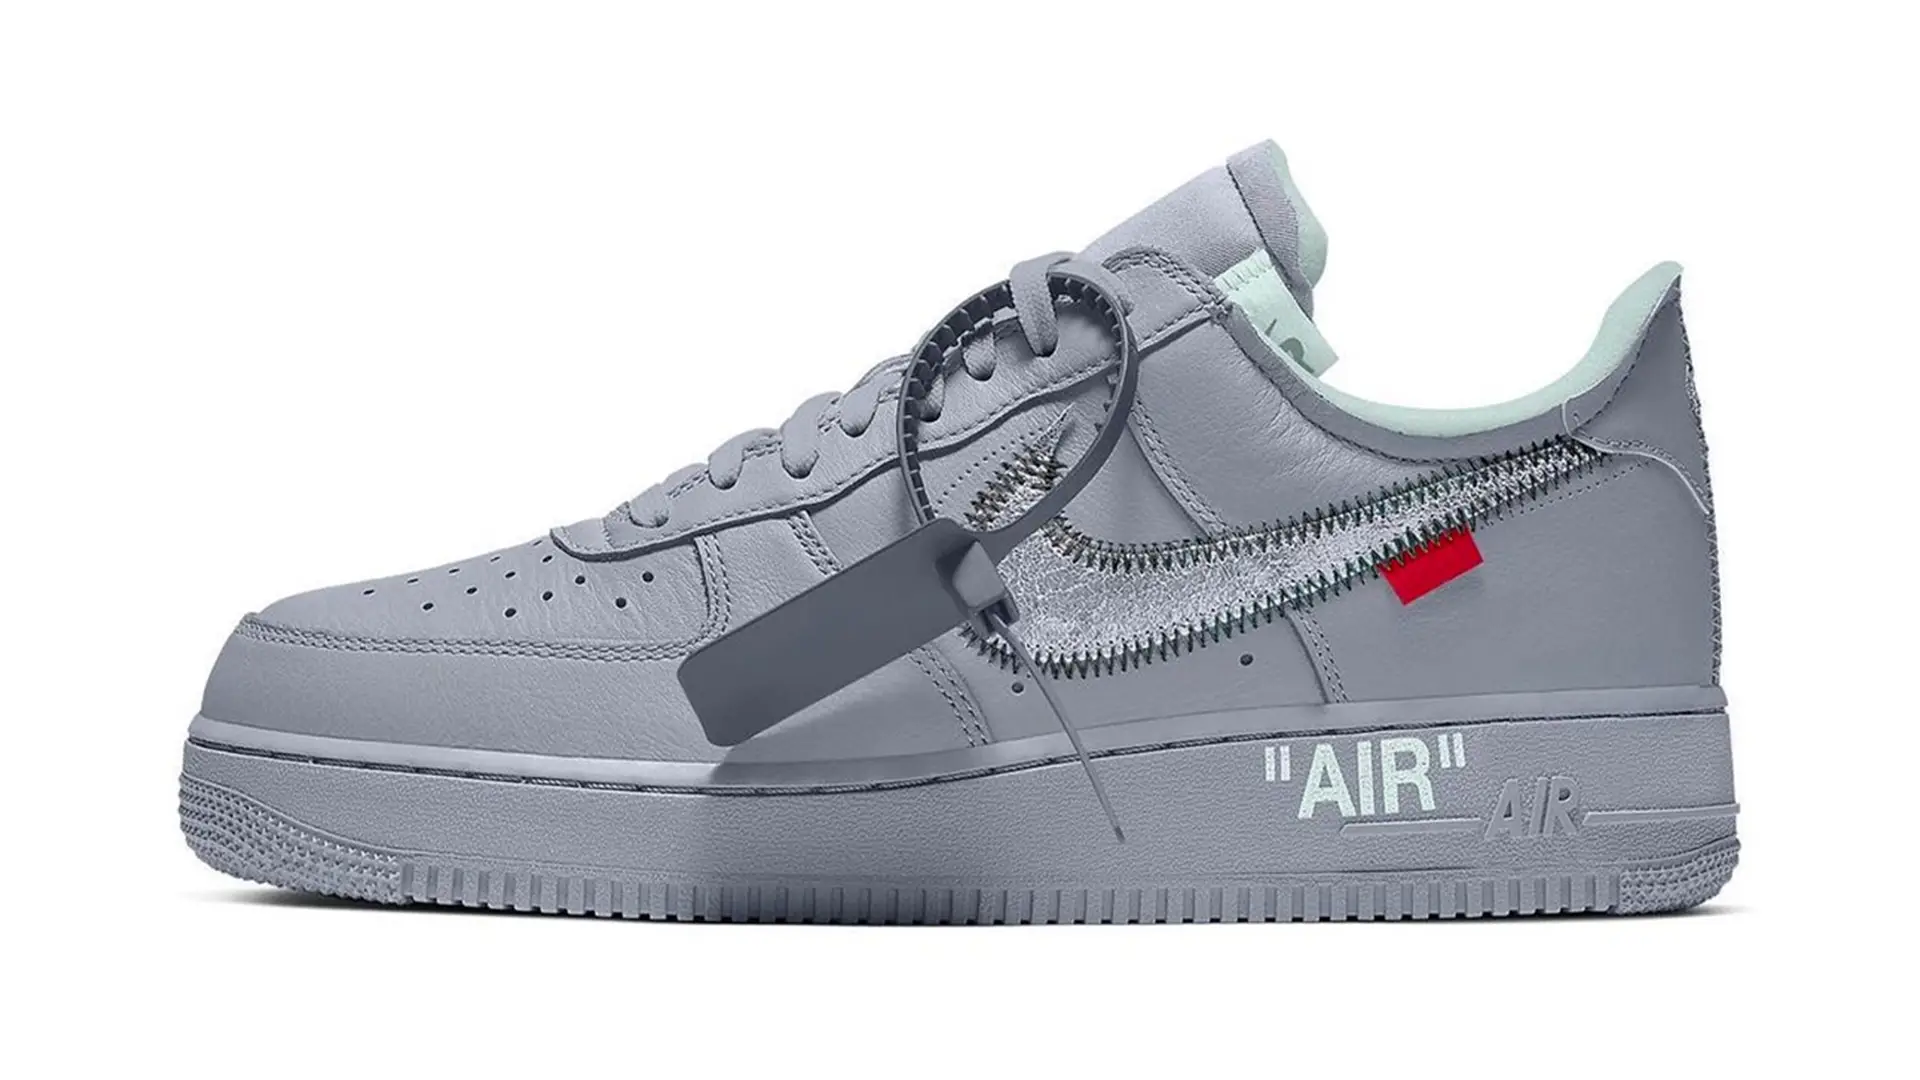 Passports At the Ready: The Off-White x Nike Air Force 1 